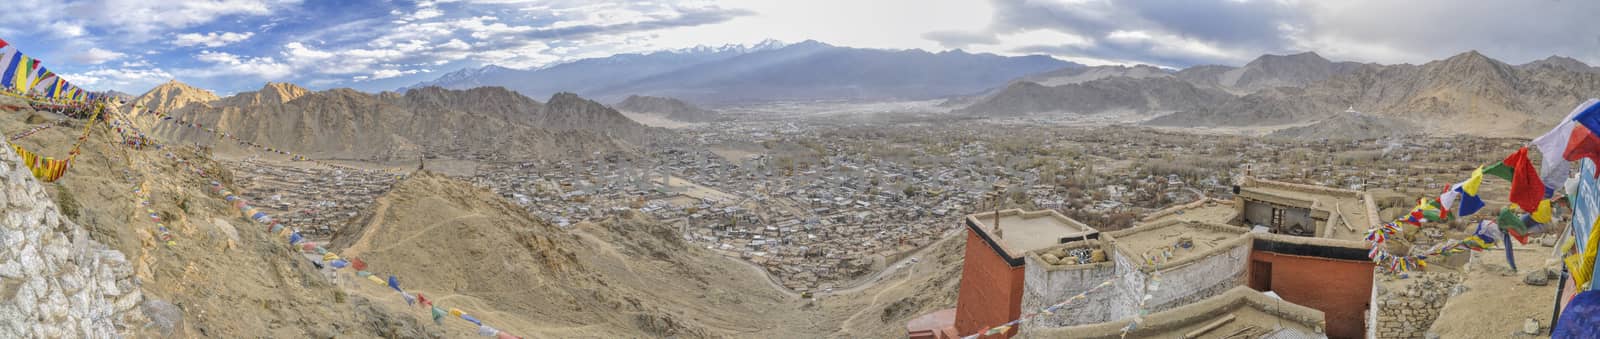 View from Leh monastery by MichalKnitl